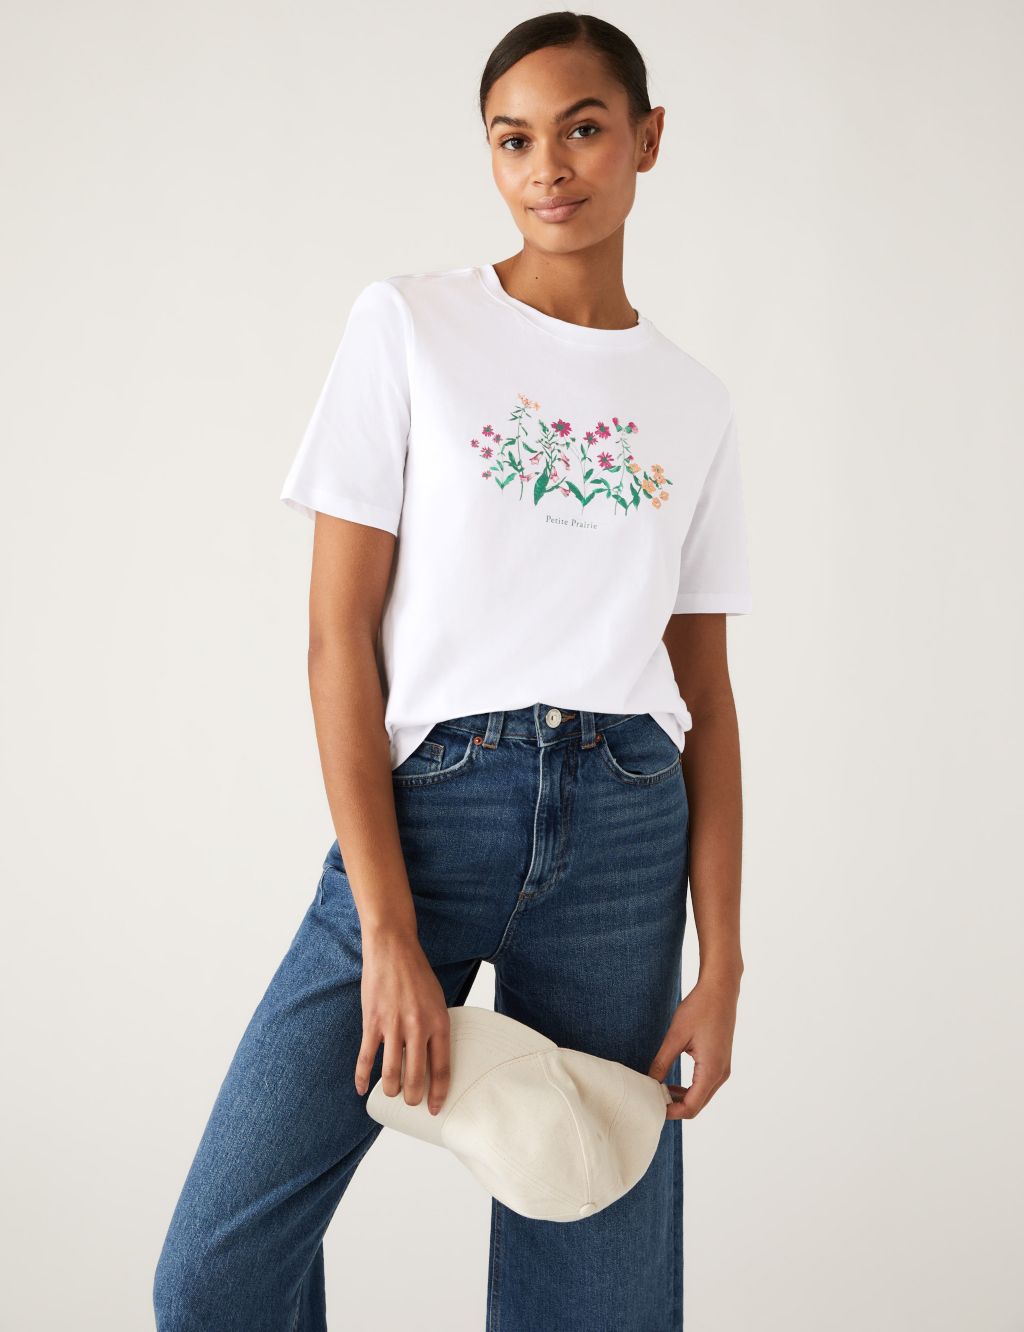 Pure Cotton Printed Everyday Fit T-Shirt